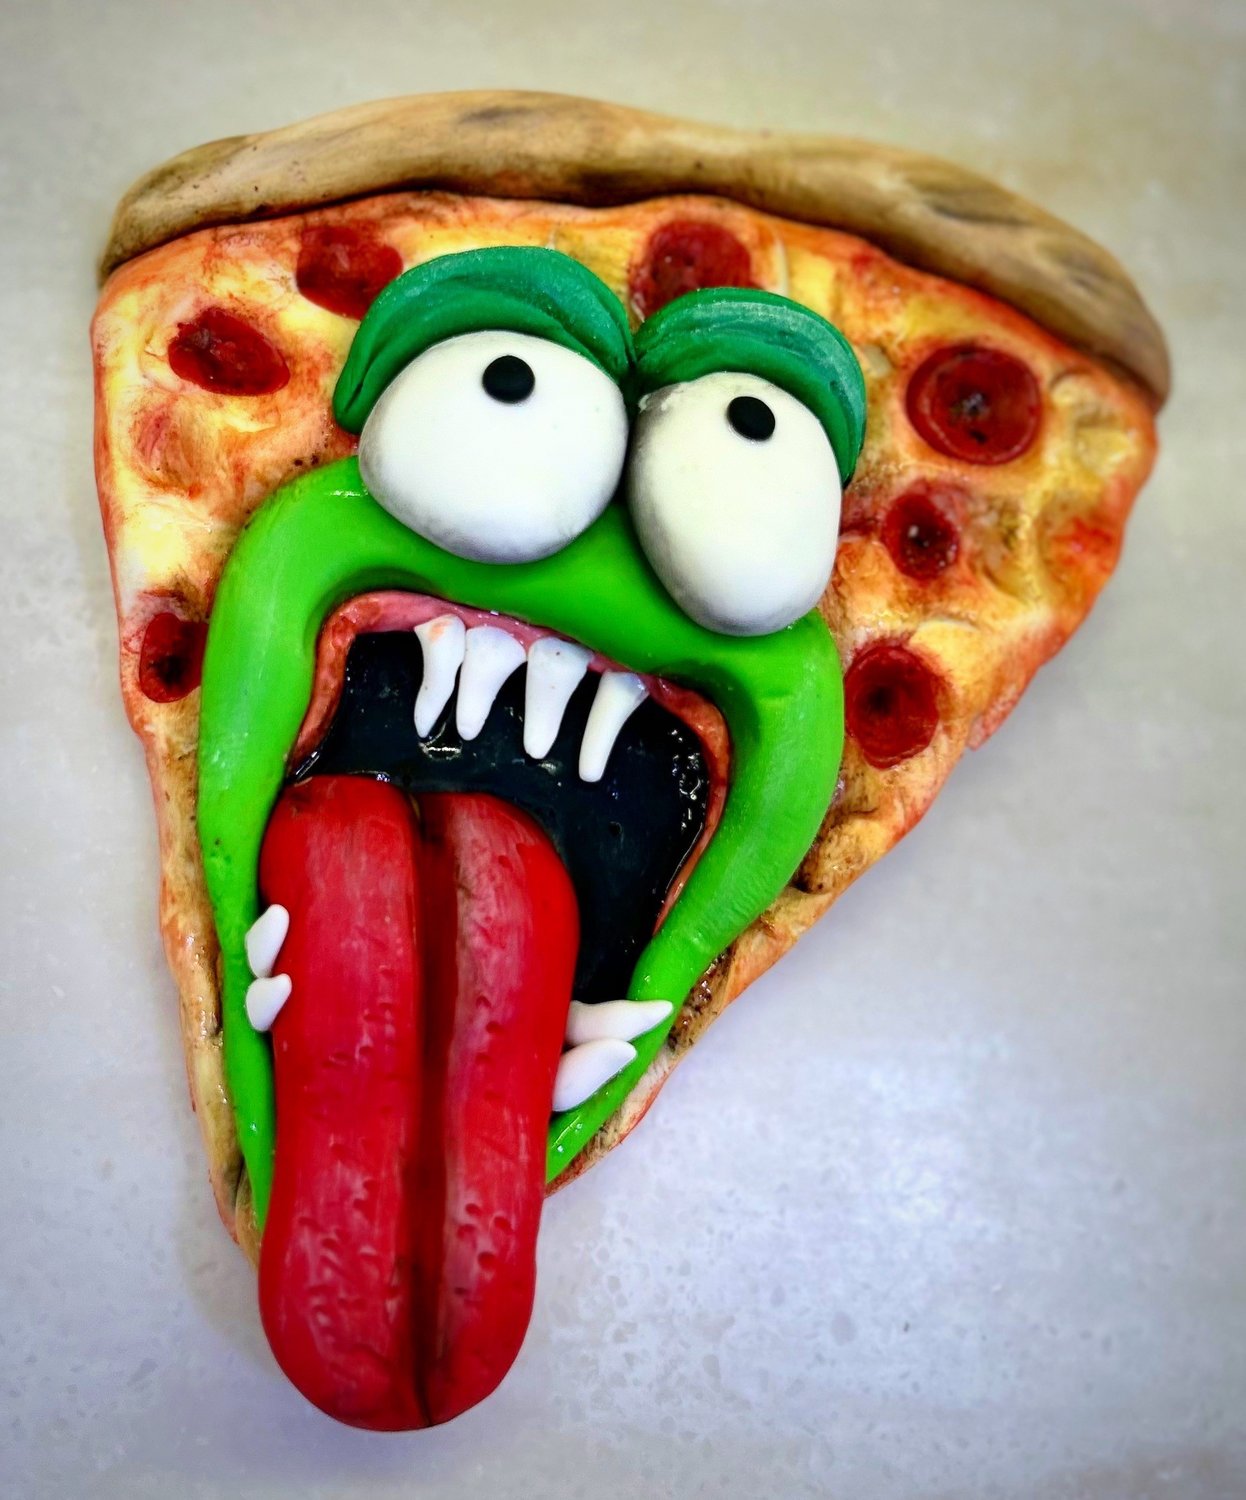 You too can make a cookie pizza monster!